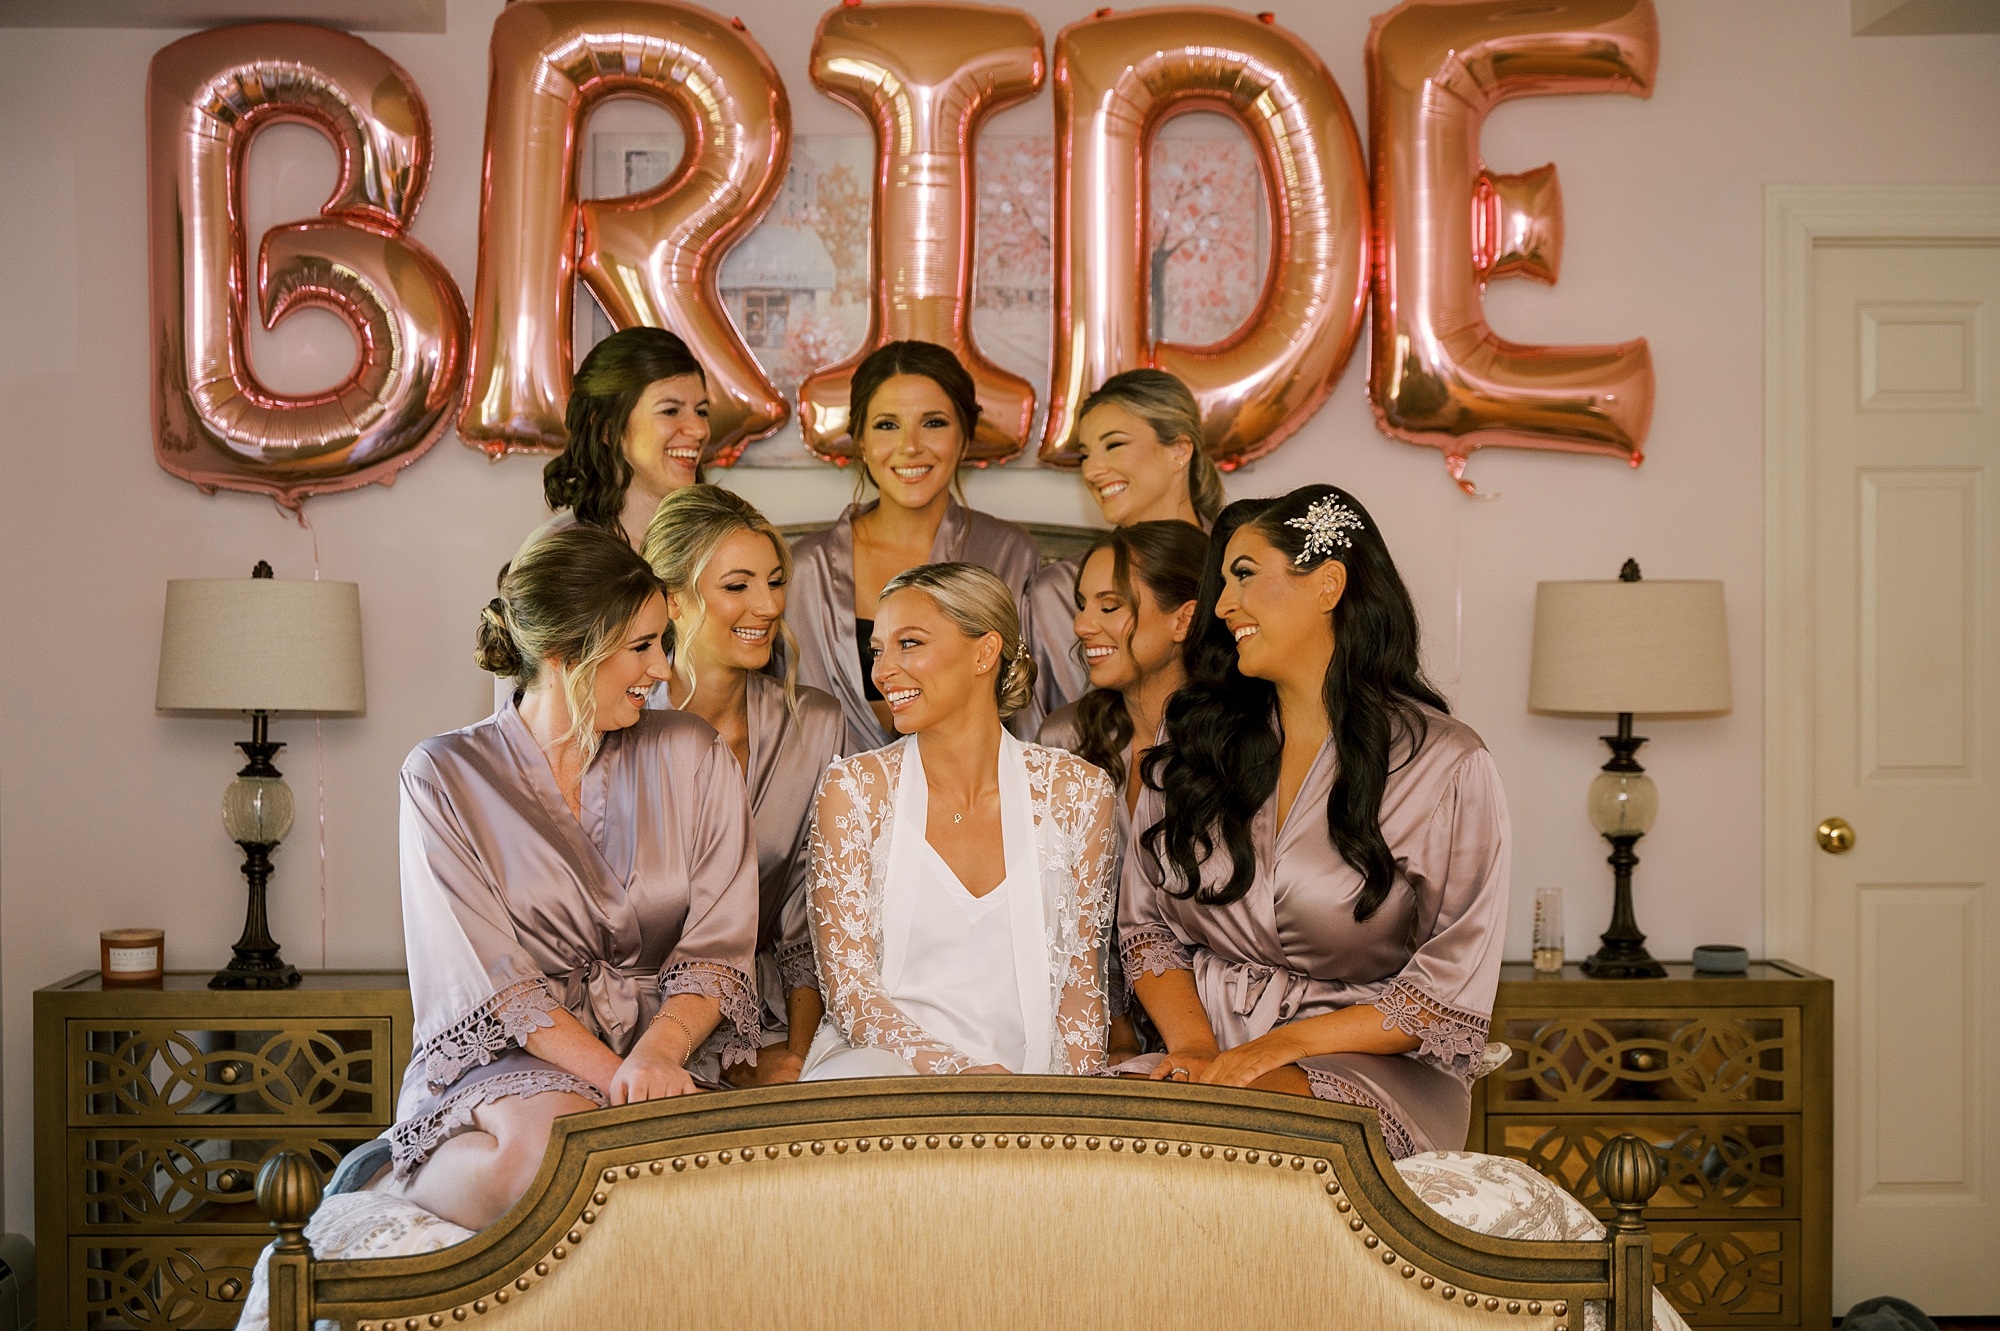 bride sits with bridesmaids under "BRIDE" balloons on bed